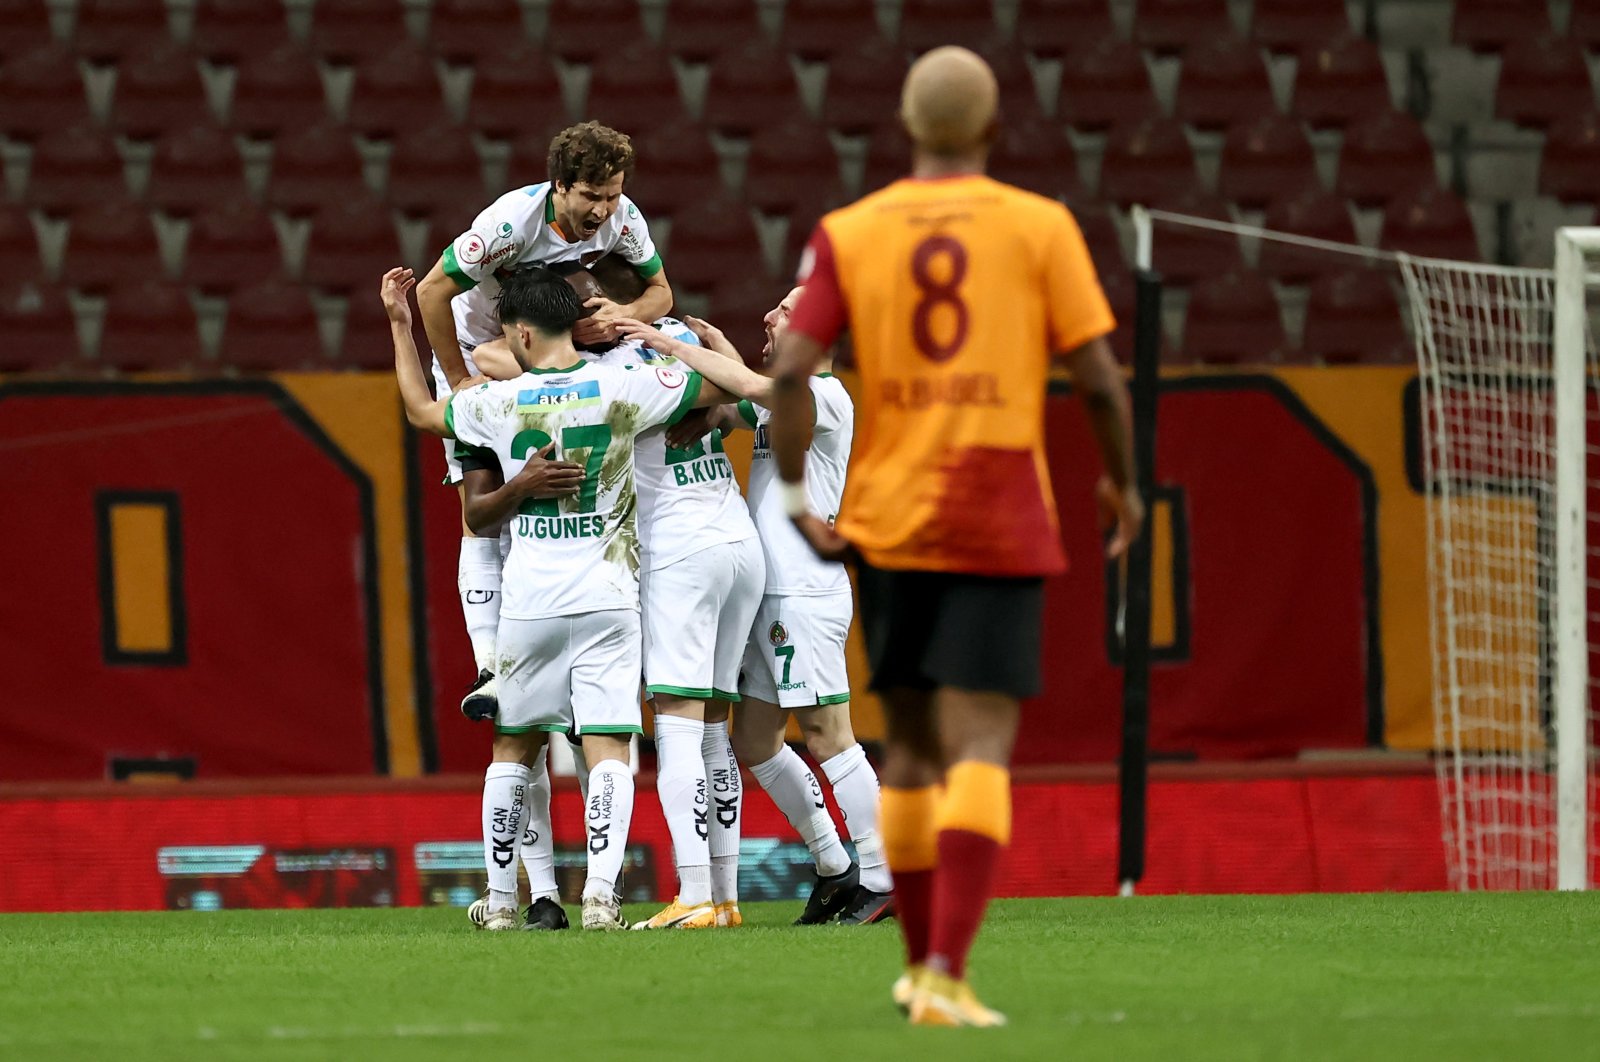 Alanyaspor players celebrate after a goal while Galatasaray's Ryan Babel walks during the Turkish Cup match at the Turk Telekom Stadium in Istanbul on Feb. 10, 2021 (AA Photo)